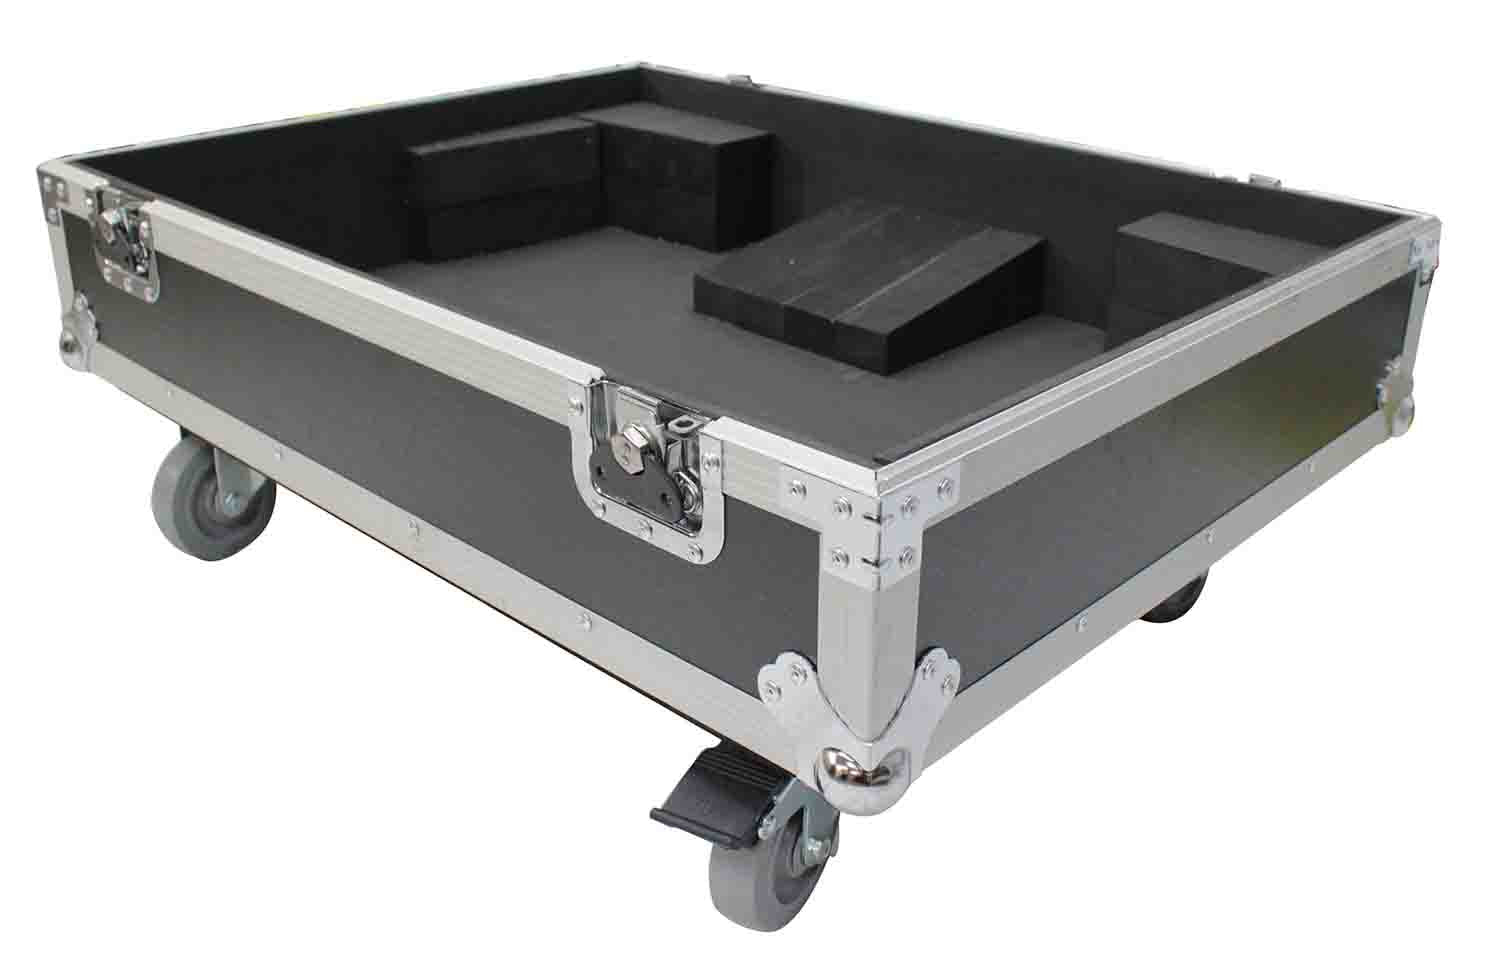 ProX X-RCF-HDL30A LAX2W, Flight Case for RCF HDL 30-A Line Array Speaker with Wheels - Holds 2 Speakers - Hollywood DJ